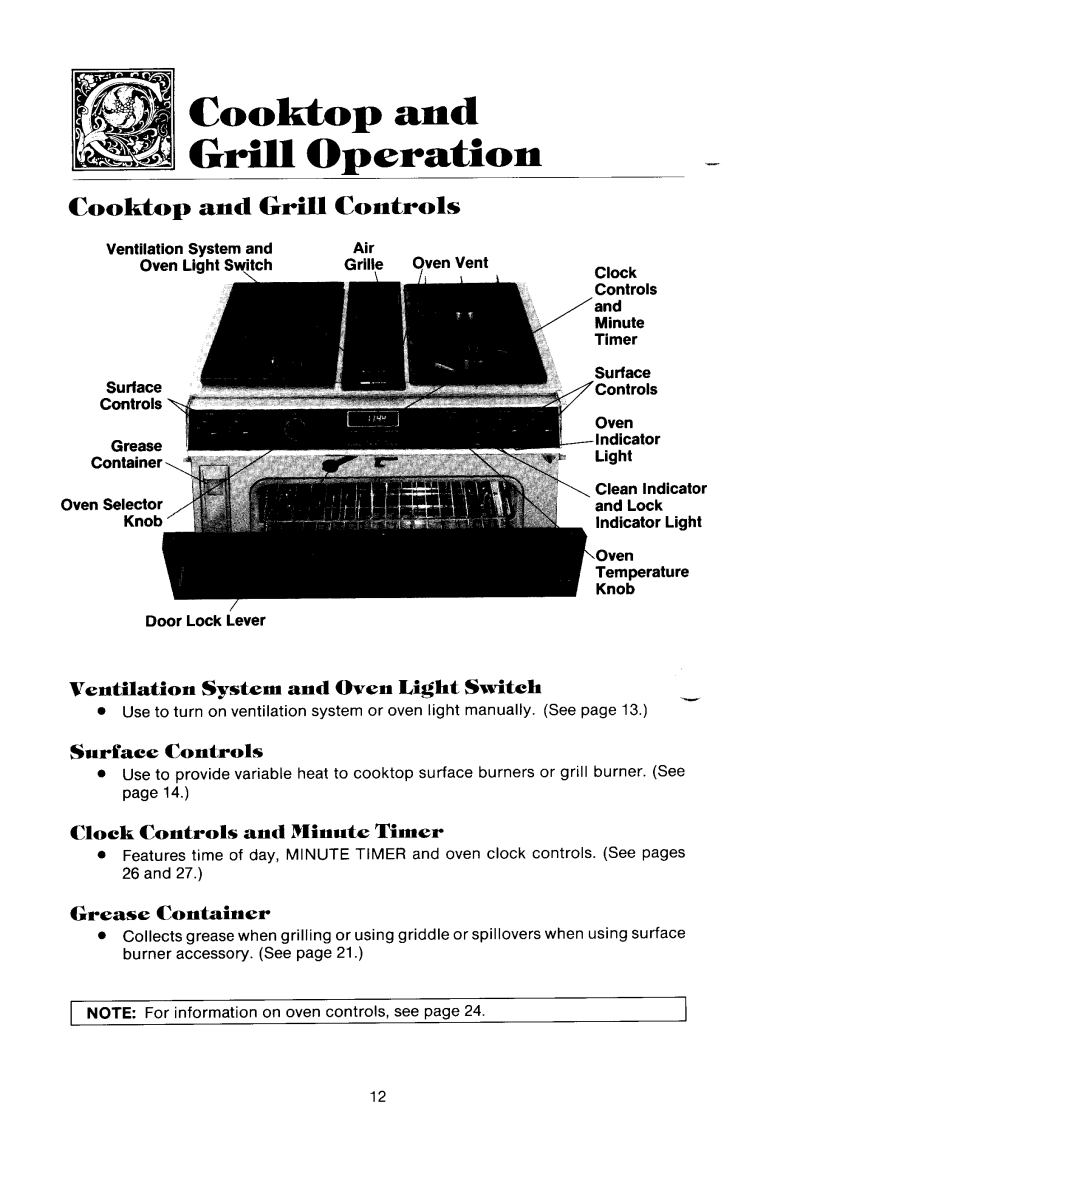 Jenn-Air SEG196 CooktopGrill Operationand, Cool n p, Controls, Ventilation, System, and Oven Light Switch, Door Lock Lever 